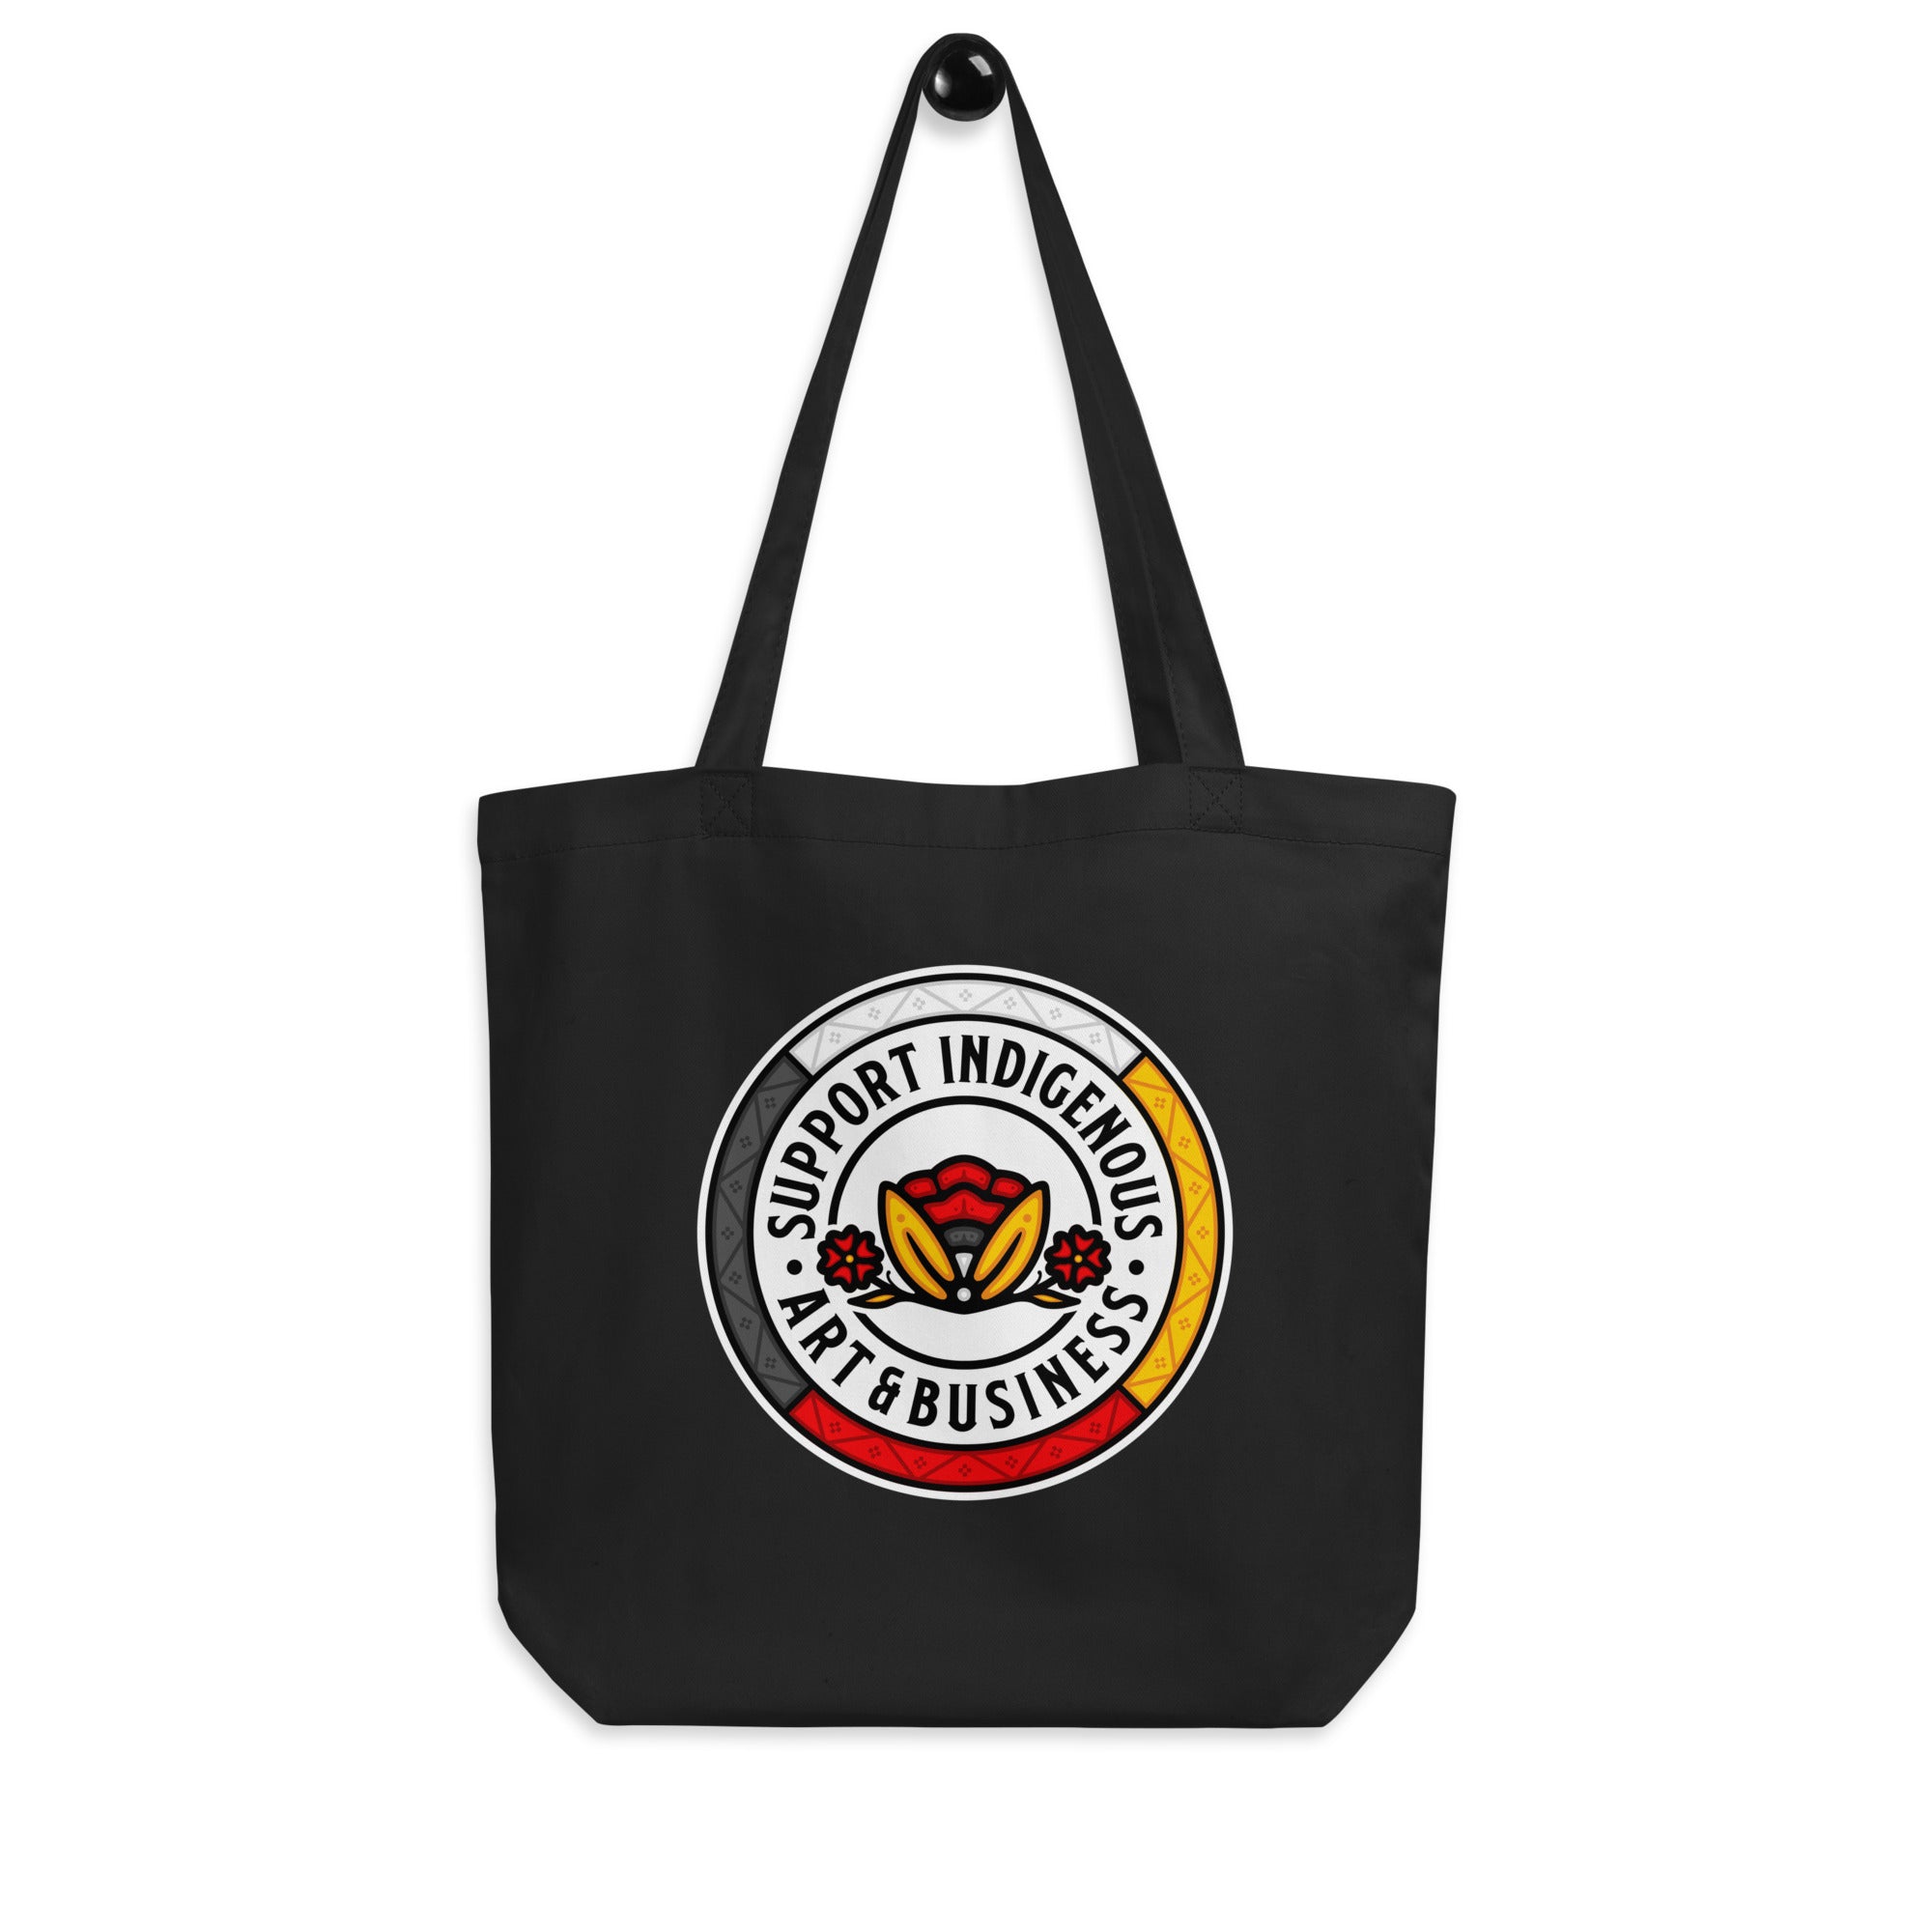 Support Indigenous Art & Business Eco Tote Bag (100% Organic Cotton)